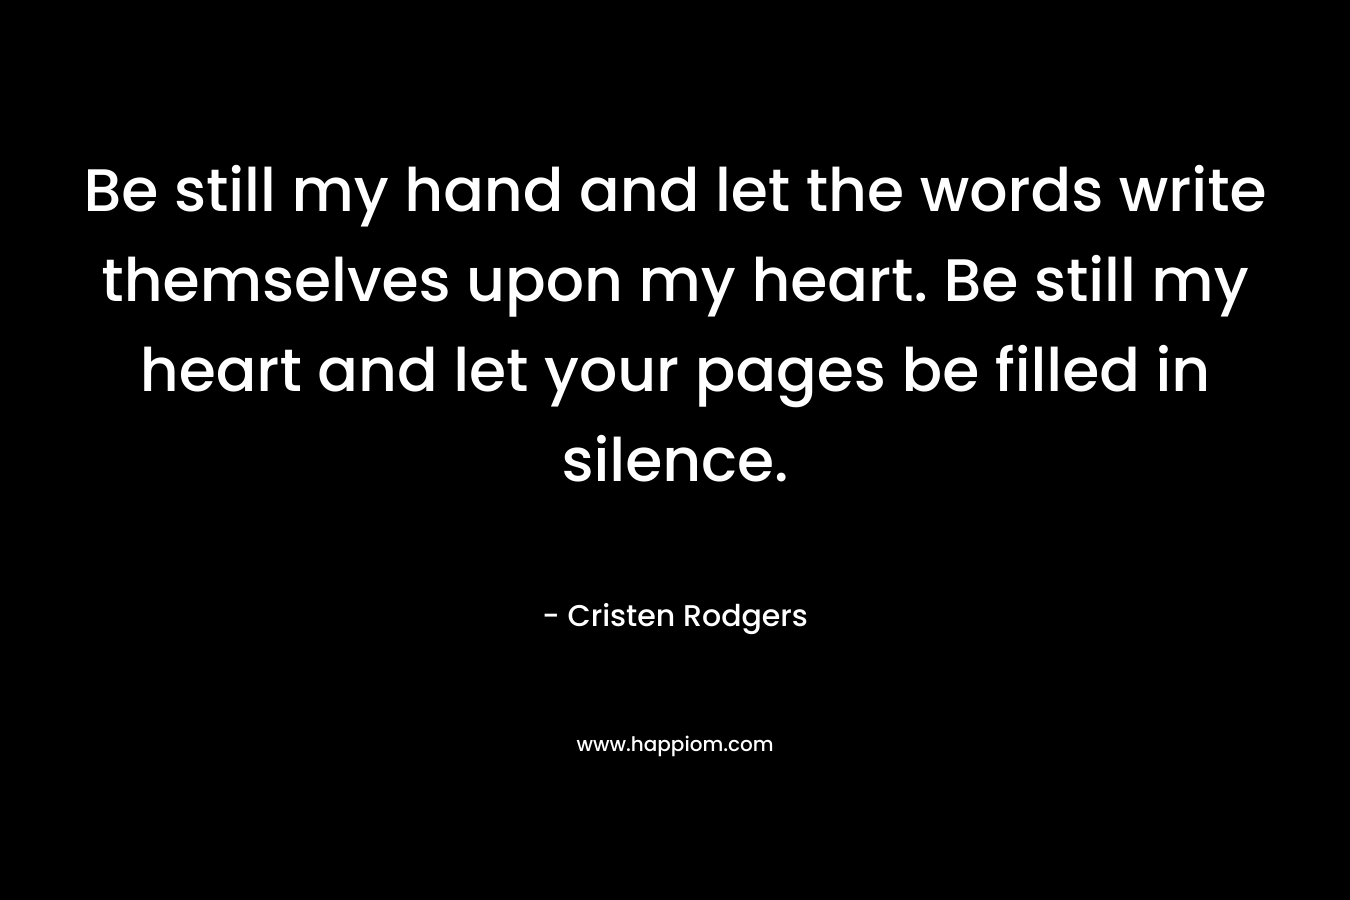 Be still my hand and let the words write themselves upon my heart. Be still my heart and let your pages be filled in silence.